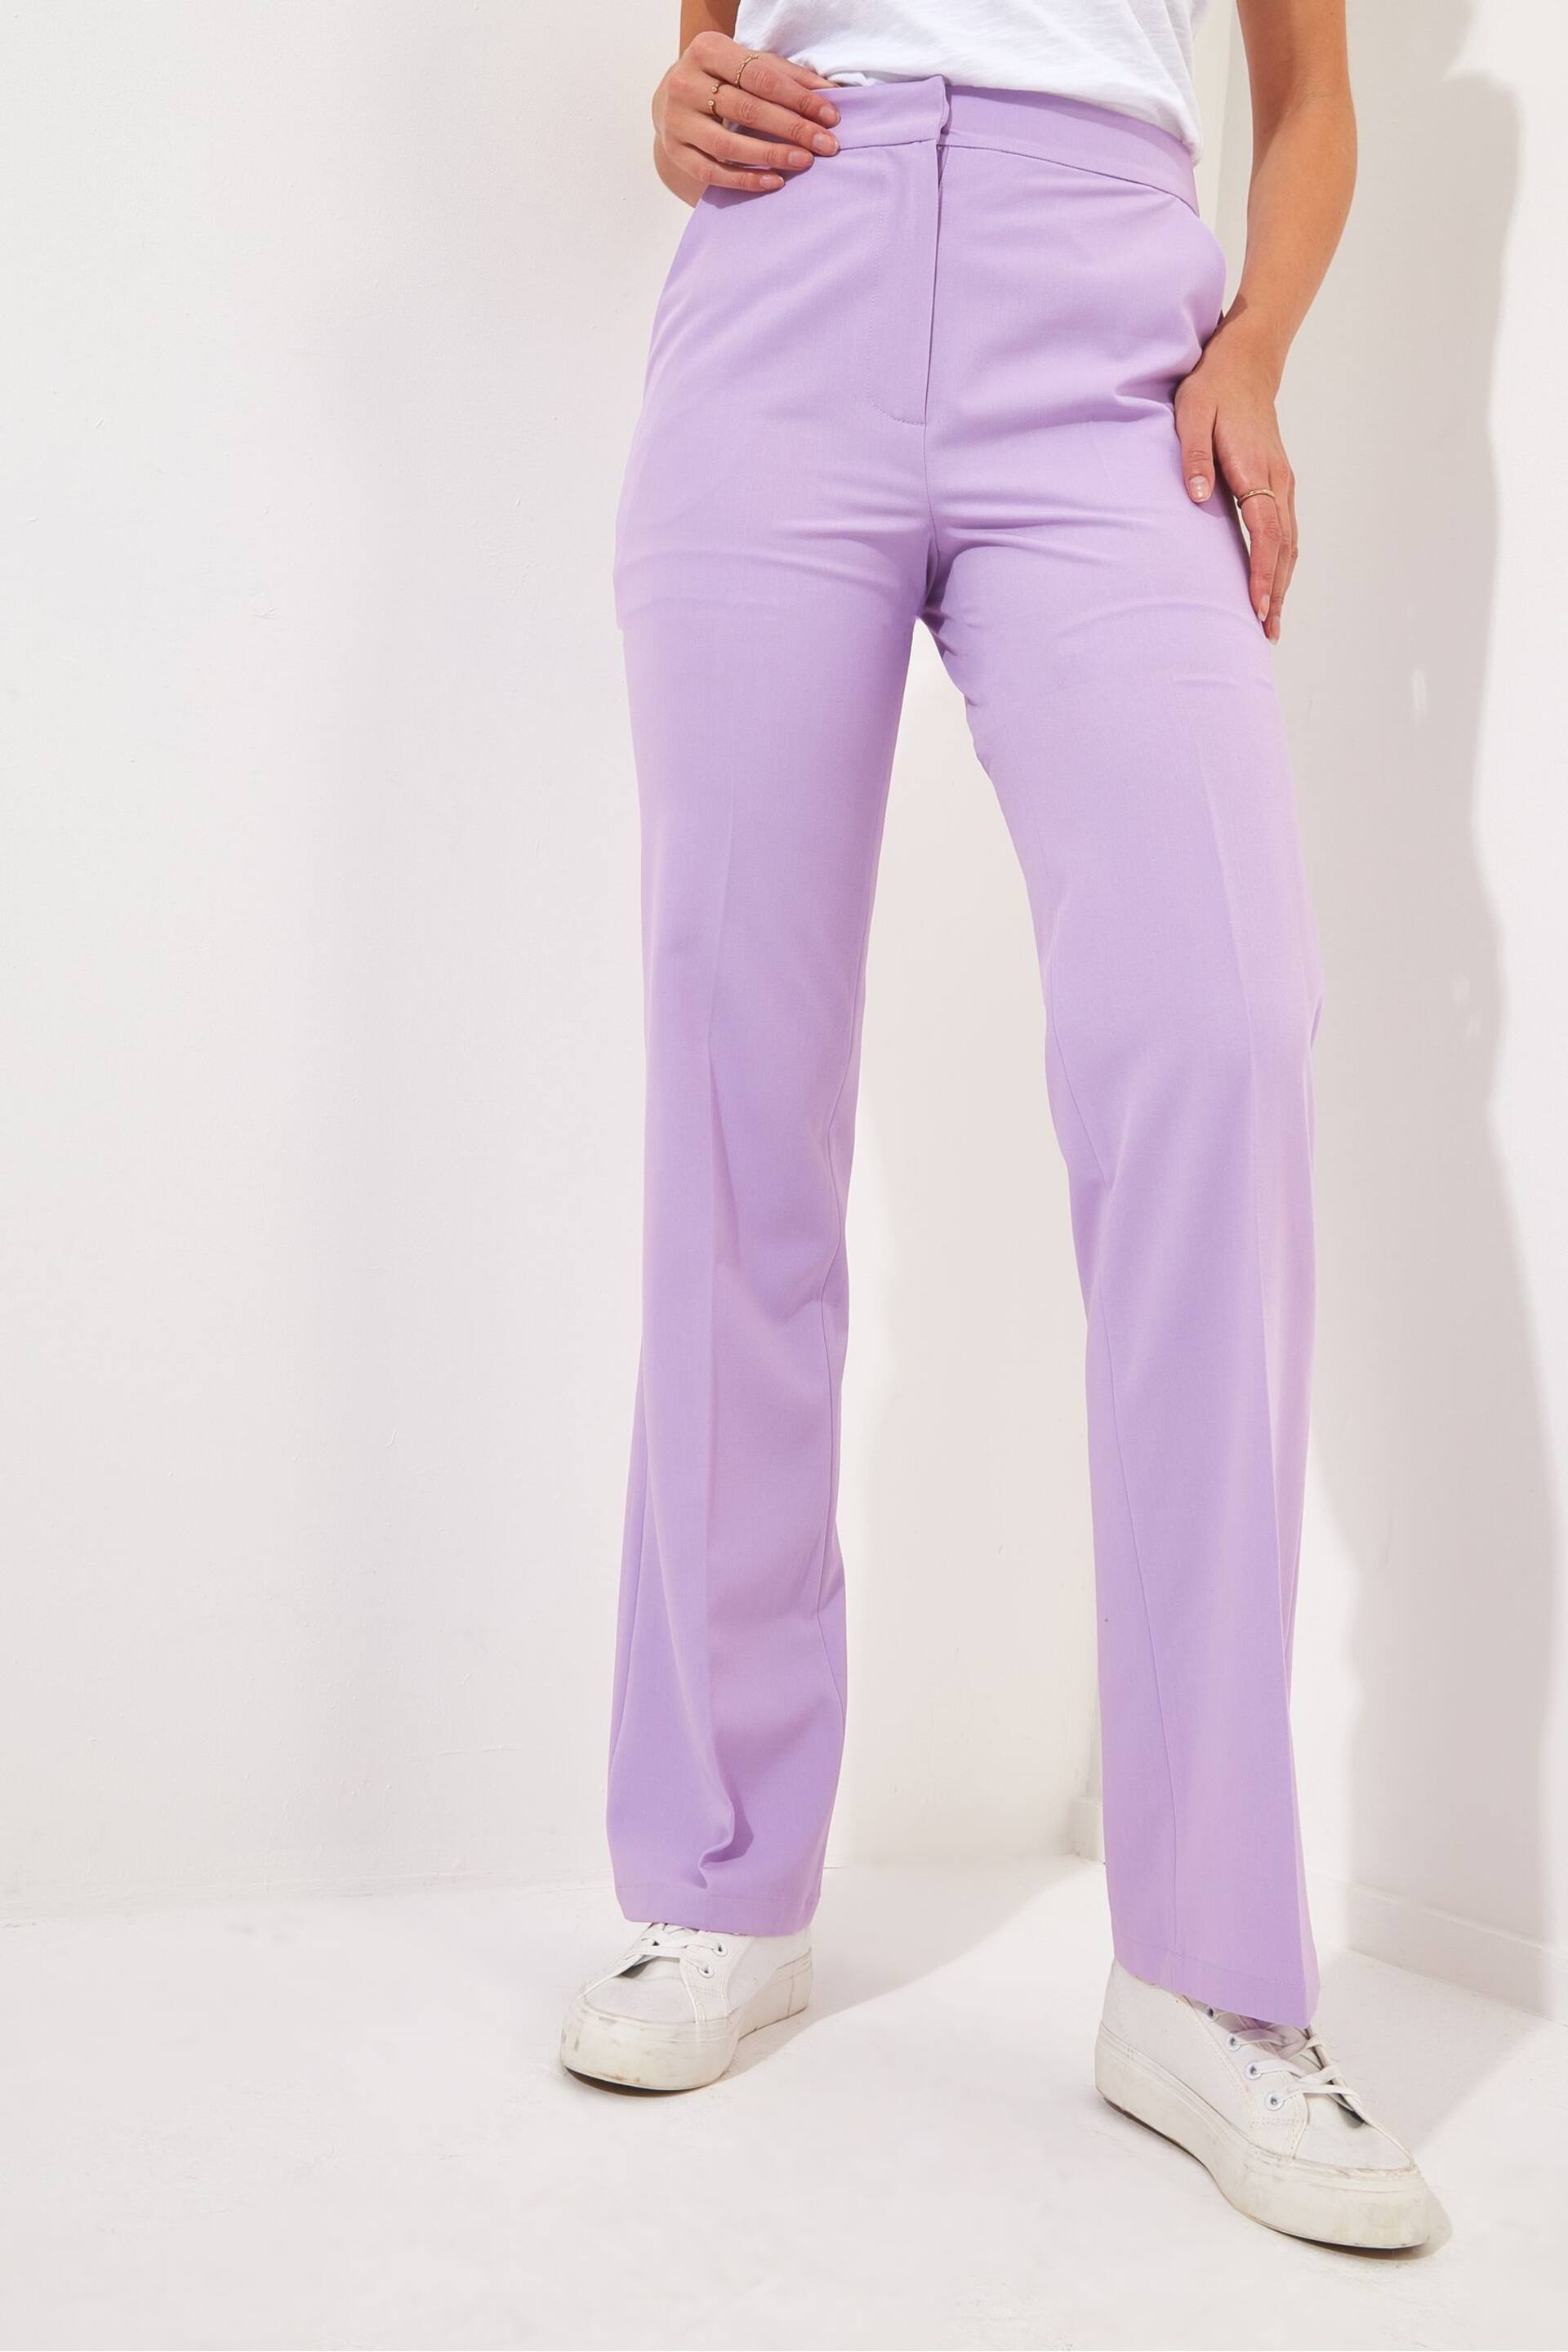 Joe Browns Purple Straight Leg Tailored Co-Ord Trousers - Image 2 of 6